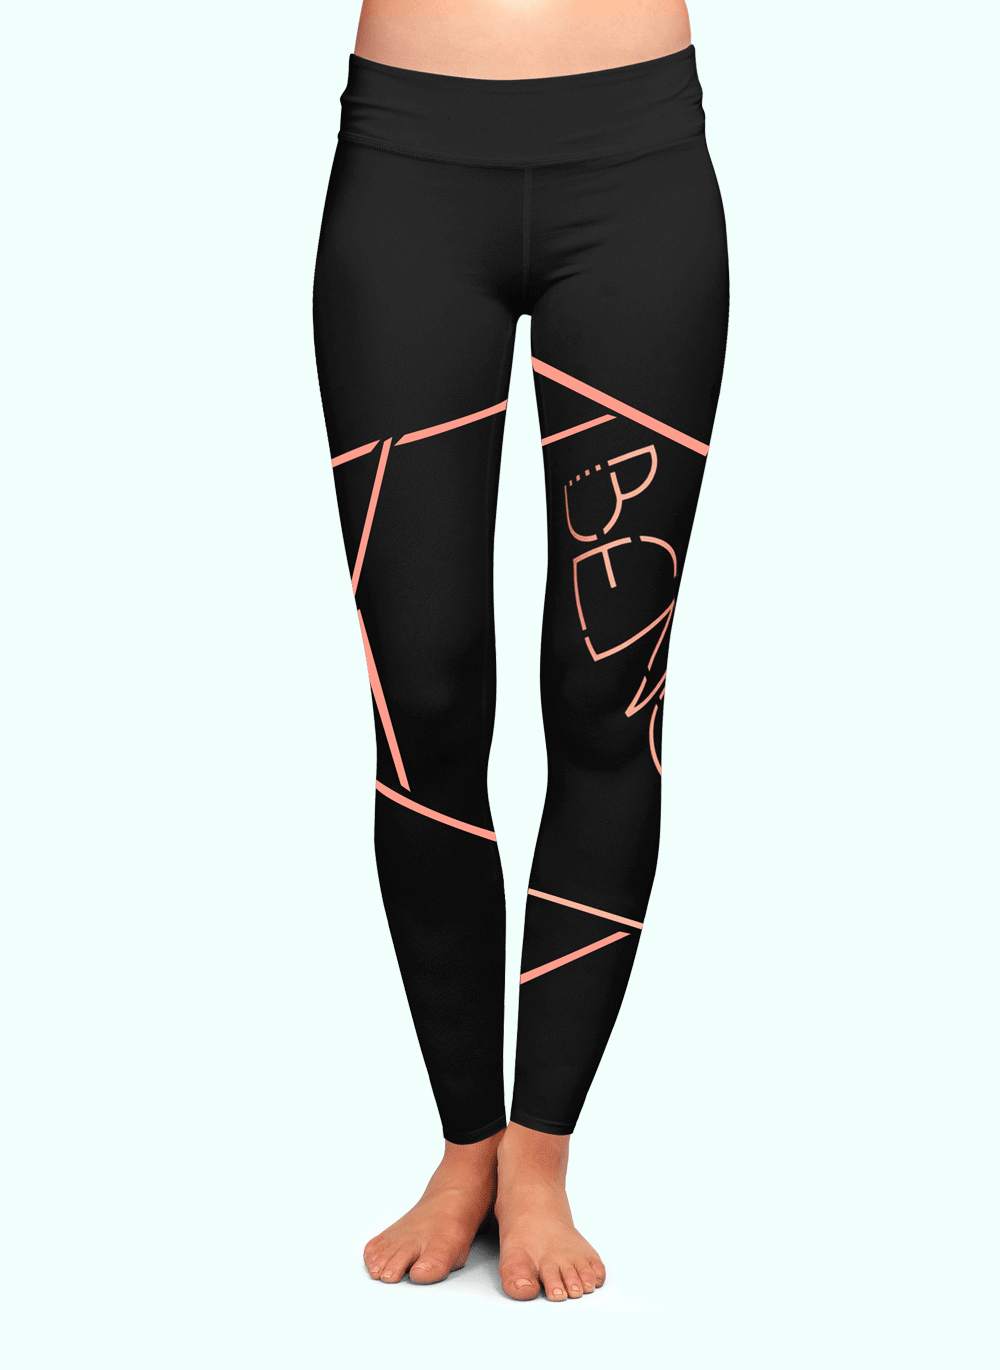 Bench.ca: The leggings are back!